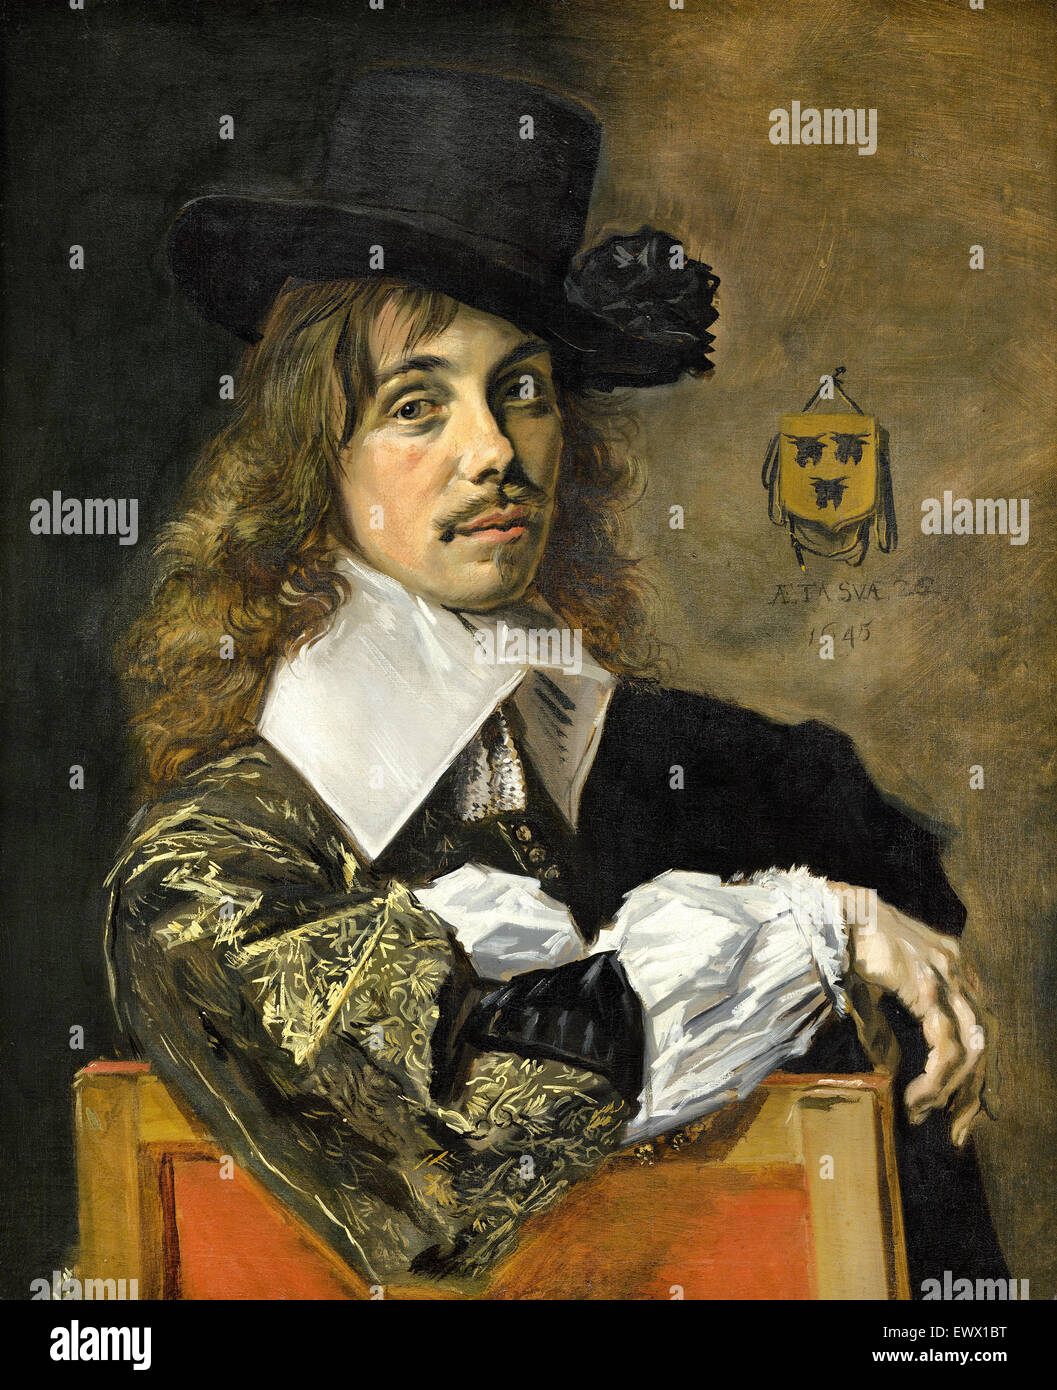 Frans Hals, Willem Coymans 1645 Oil on canvas. National Gallery of Art, Washington, D.C., USA. Stock Photo